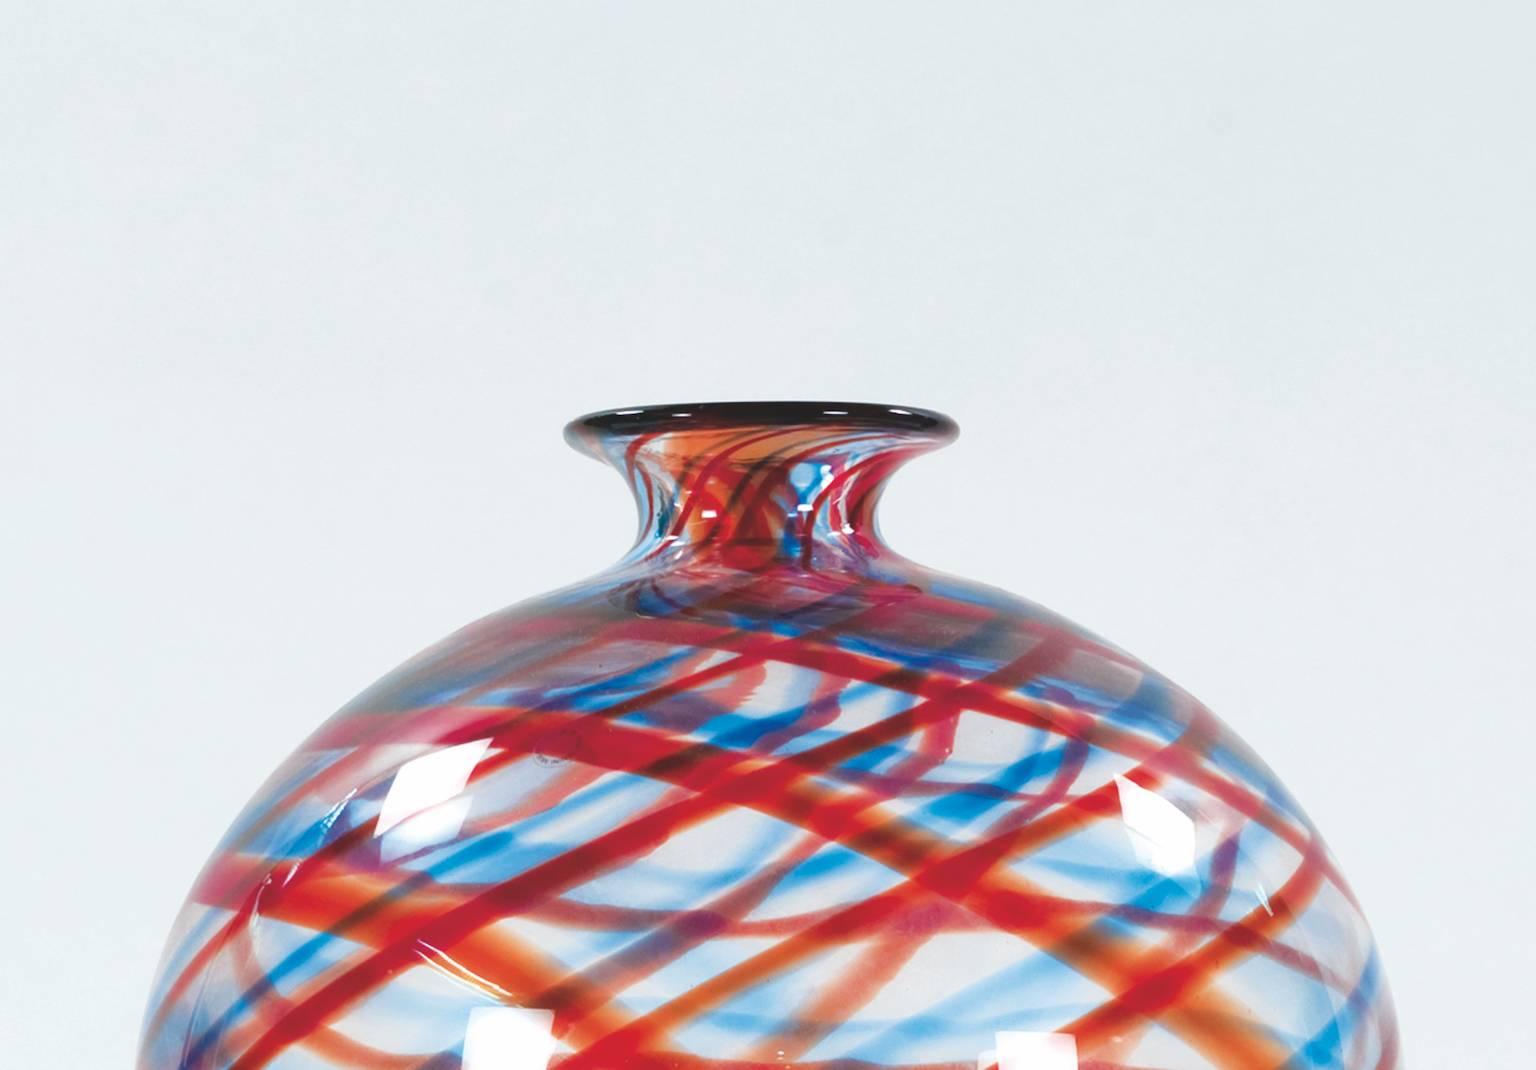 Large vase Simirone in blown glass intertwined polychrome canes on a base in faceted glass block designed by Alessandro Mendini for Venini in circa 1989. Limited edition of 50 pieces. Signature on the base and authentic